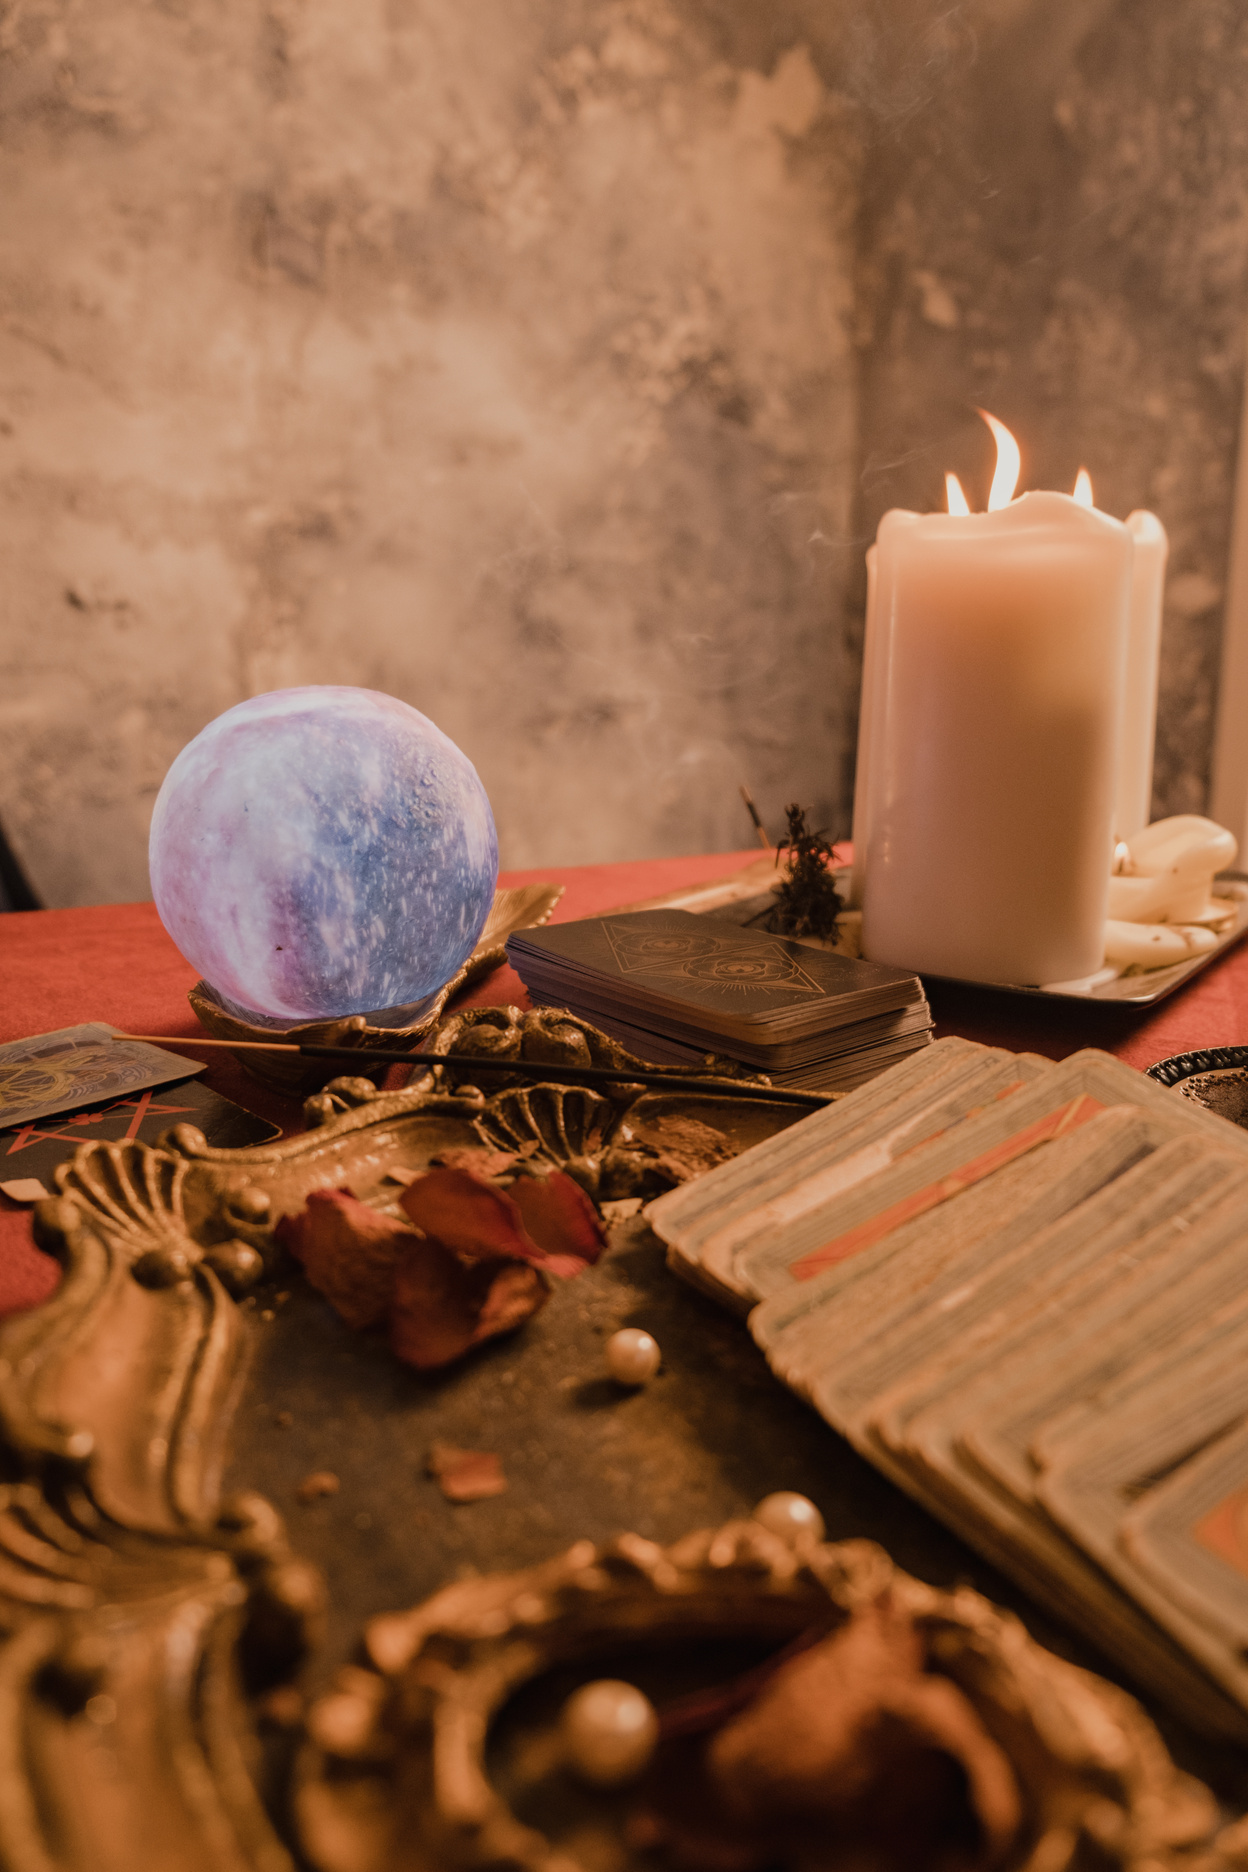 Tarot Cards, Crystal Ball, and Candles on the Table